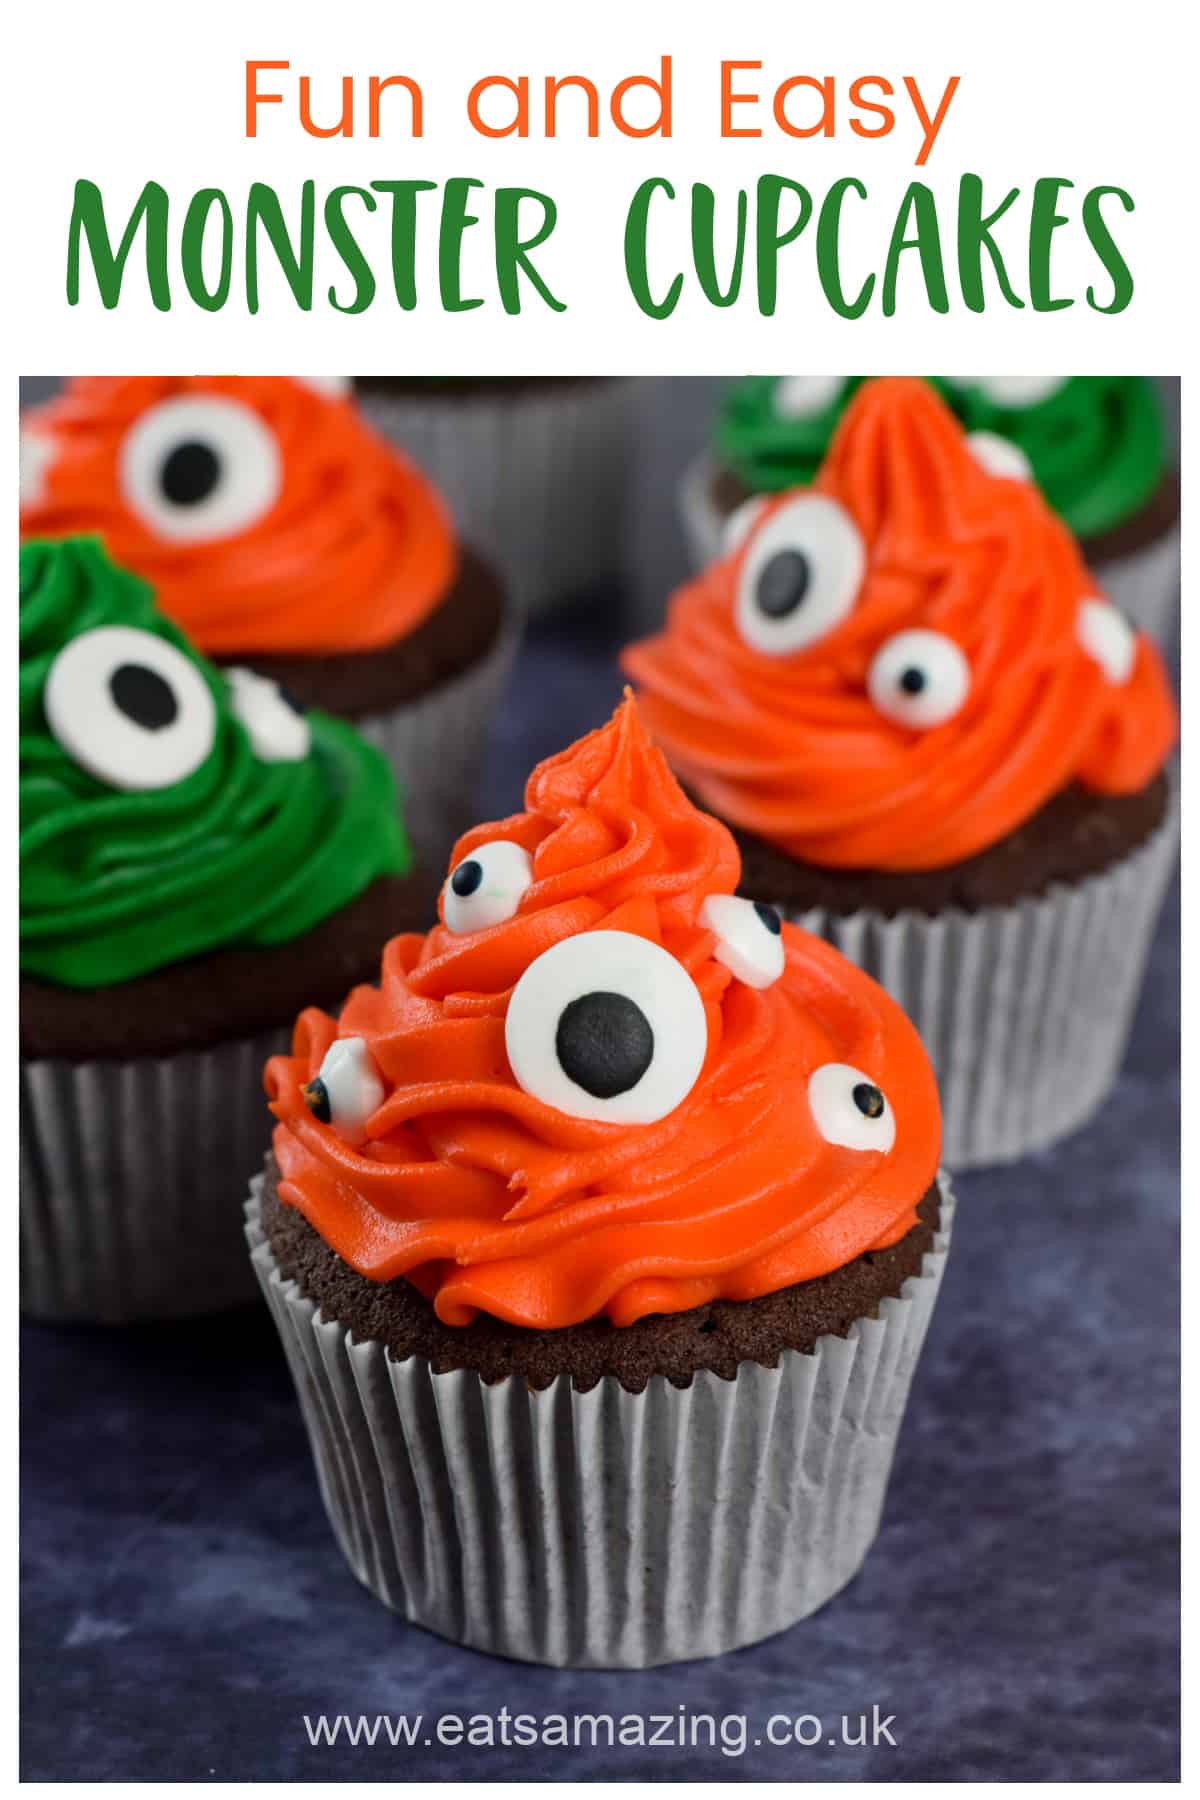 How to make fun and easy Monster cupcakes - Halloween baking recipe for kids